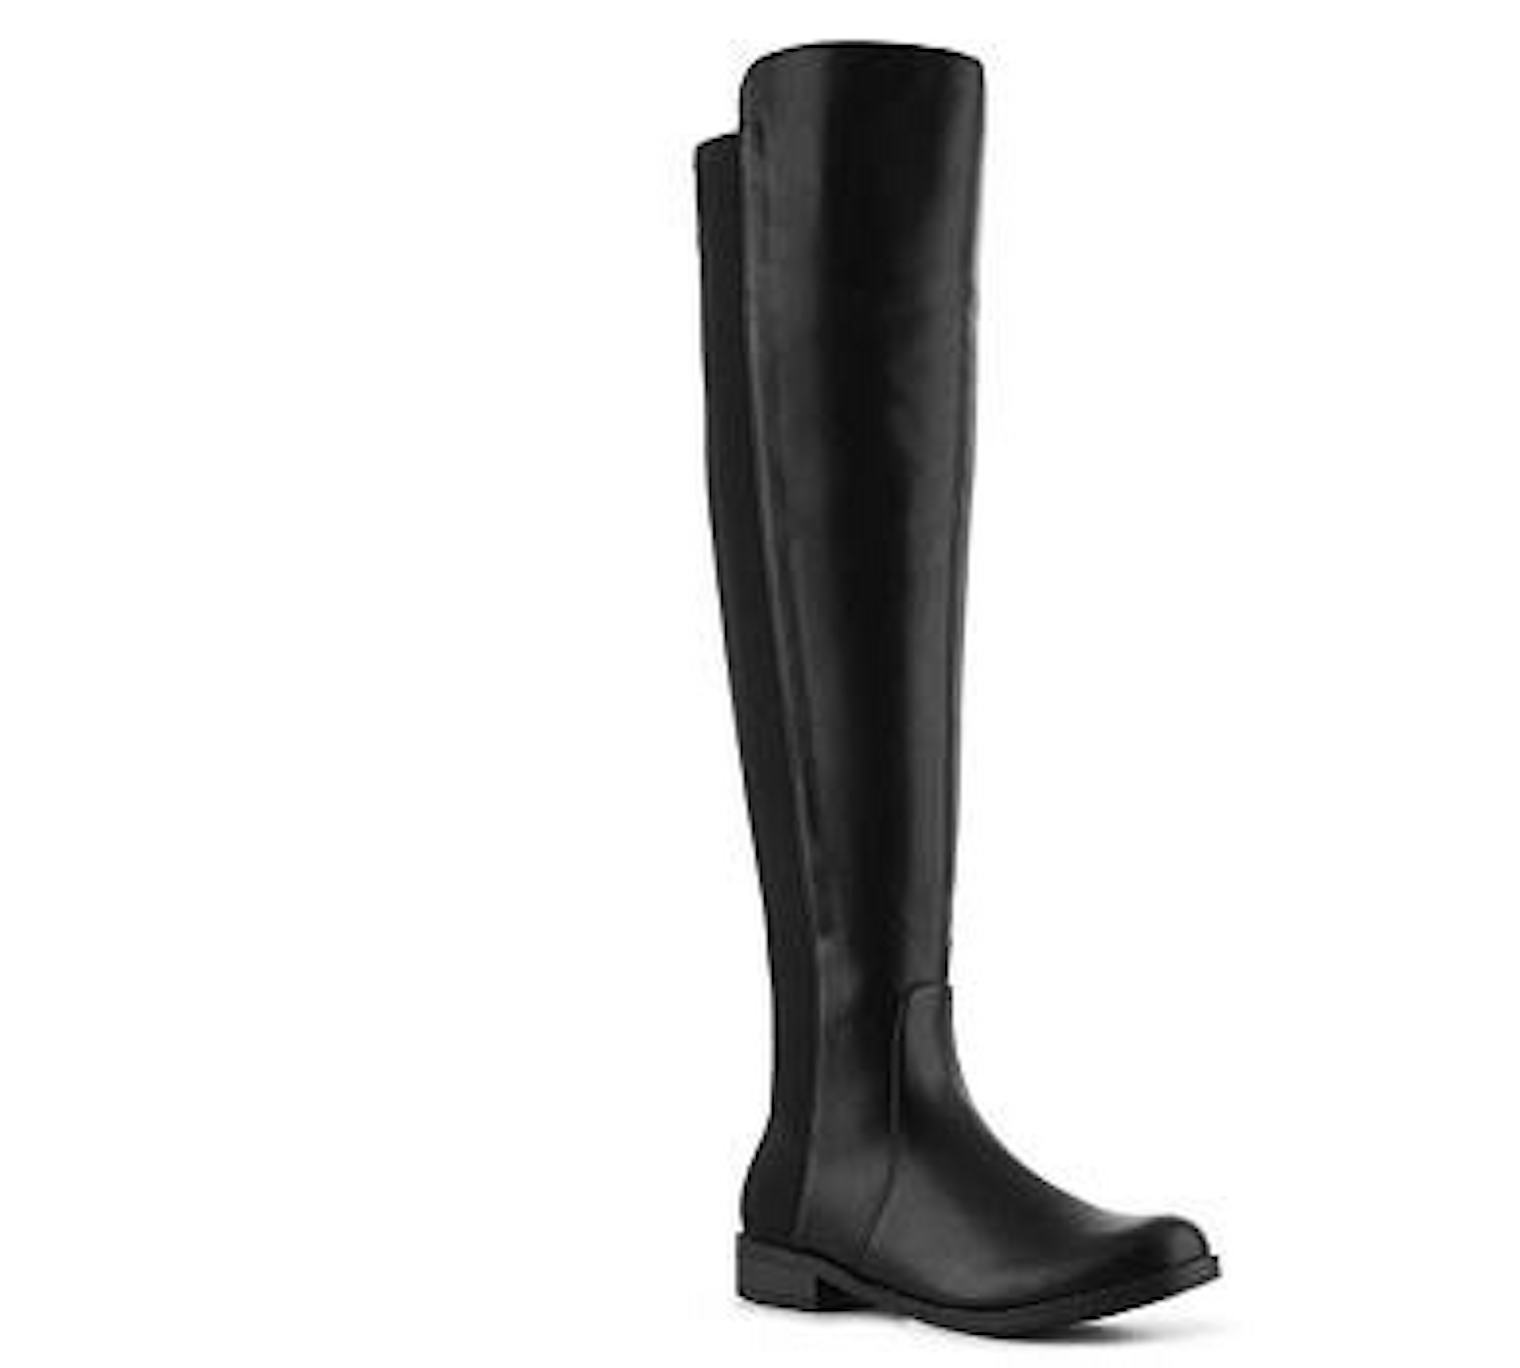 11 Places To Shop Wide Calf Boots That Will Solve All Your Over The ...